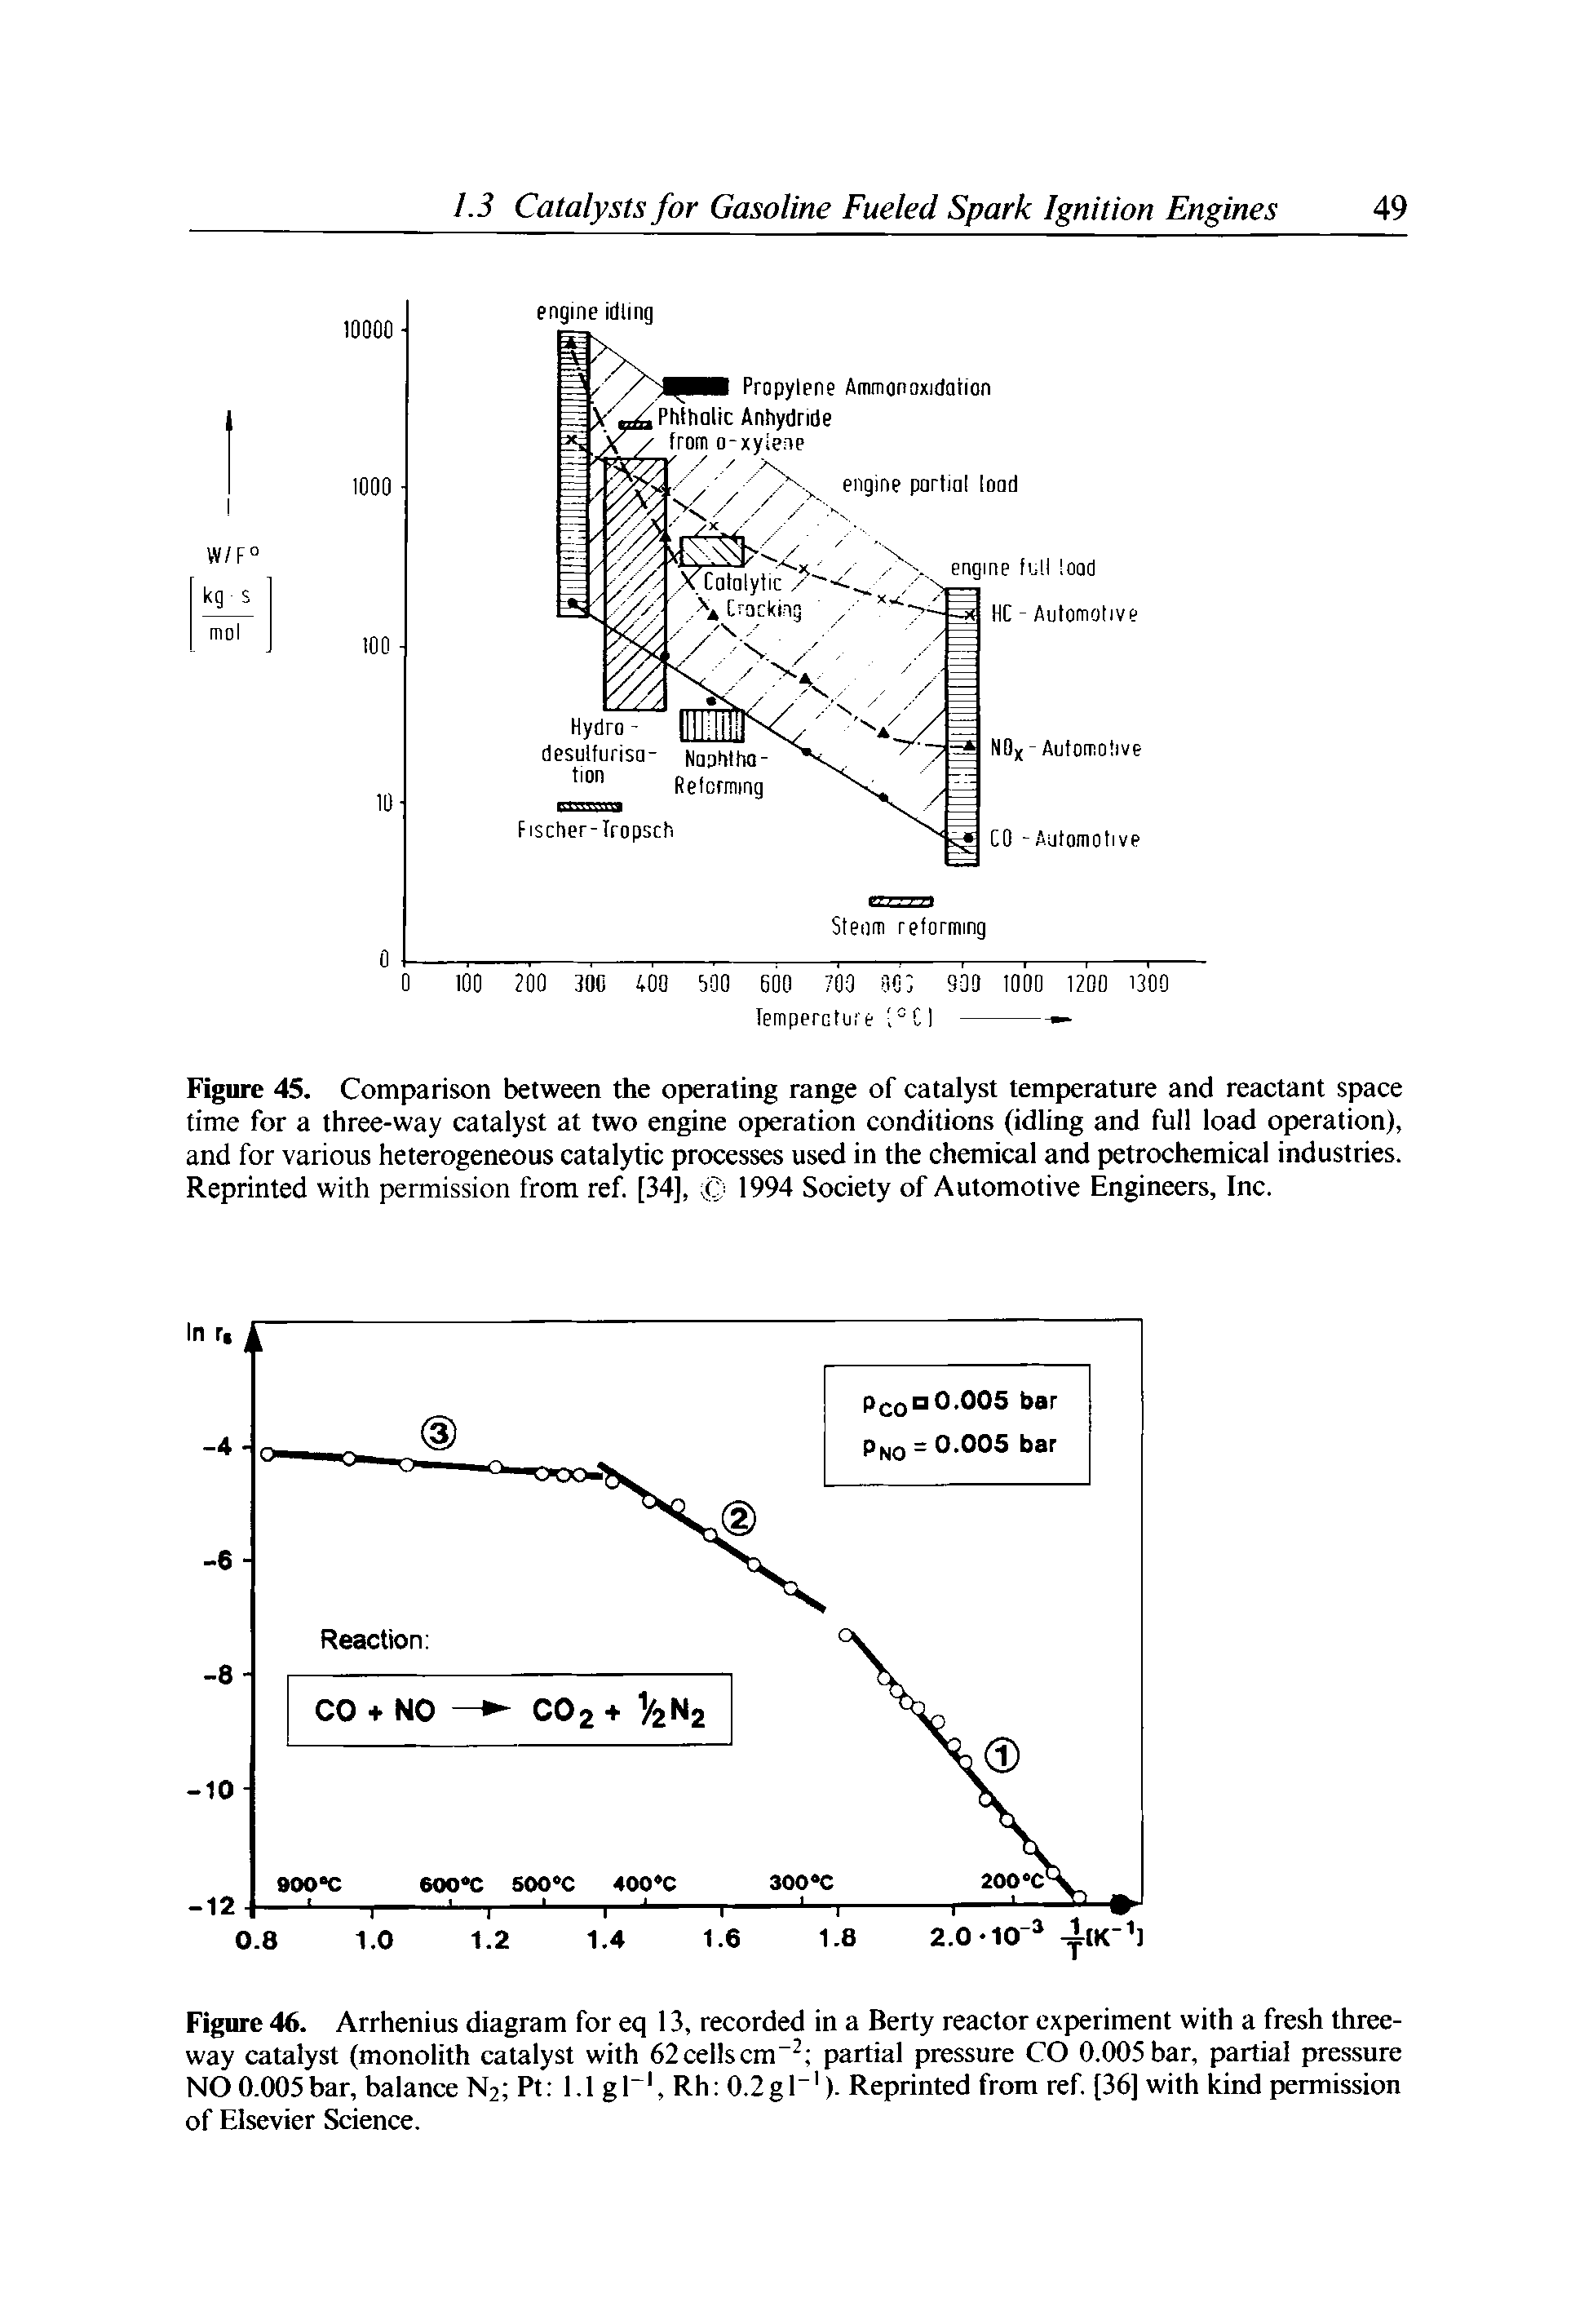 Figure 46. Arrhenius diagram for eq 13, recorded in a Berty reactor experiment with a fresh three-way catalyst (monolith catalyst with 62cellscm partial pressure CO 0.005 bar, partial pressure NO 0.005 bar, balance N2 Pt 1.1 g T, Rh 0.2 g I" ). Reprinted from ref [36] with kind permission of Elsevier Seience.